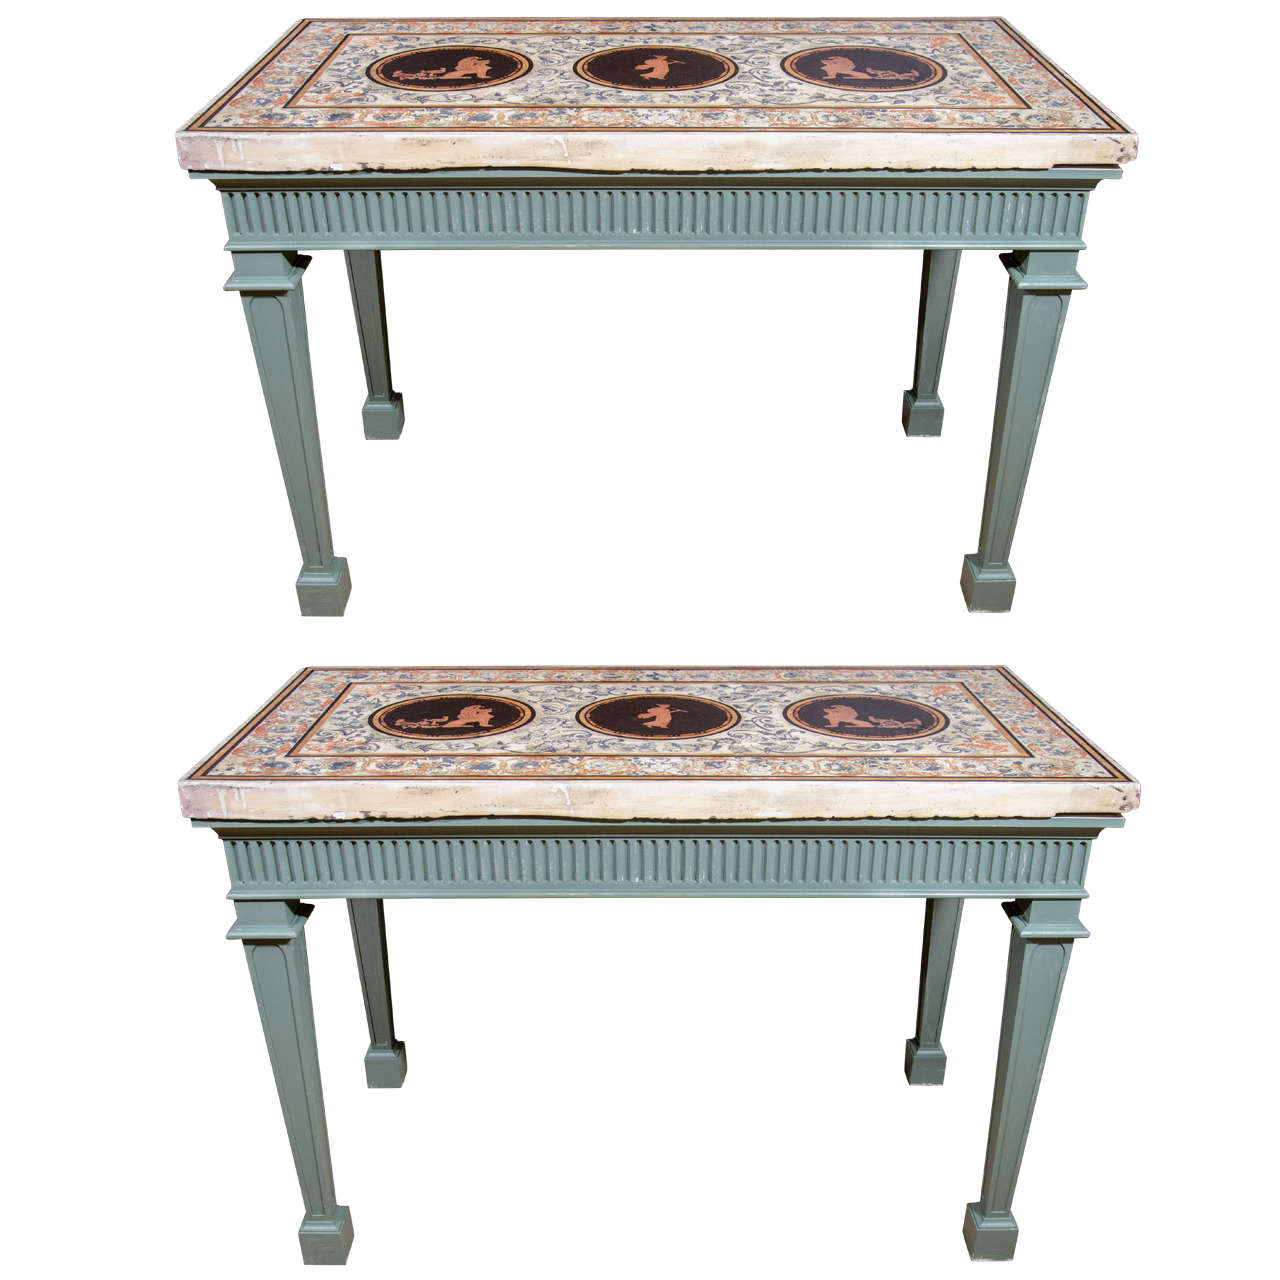 A Pair of Scagliola Top Grand Tour/Neoclassical Style Console Tables For Sale